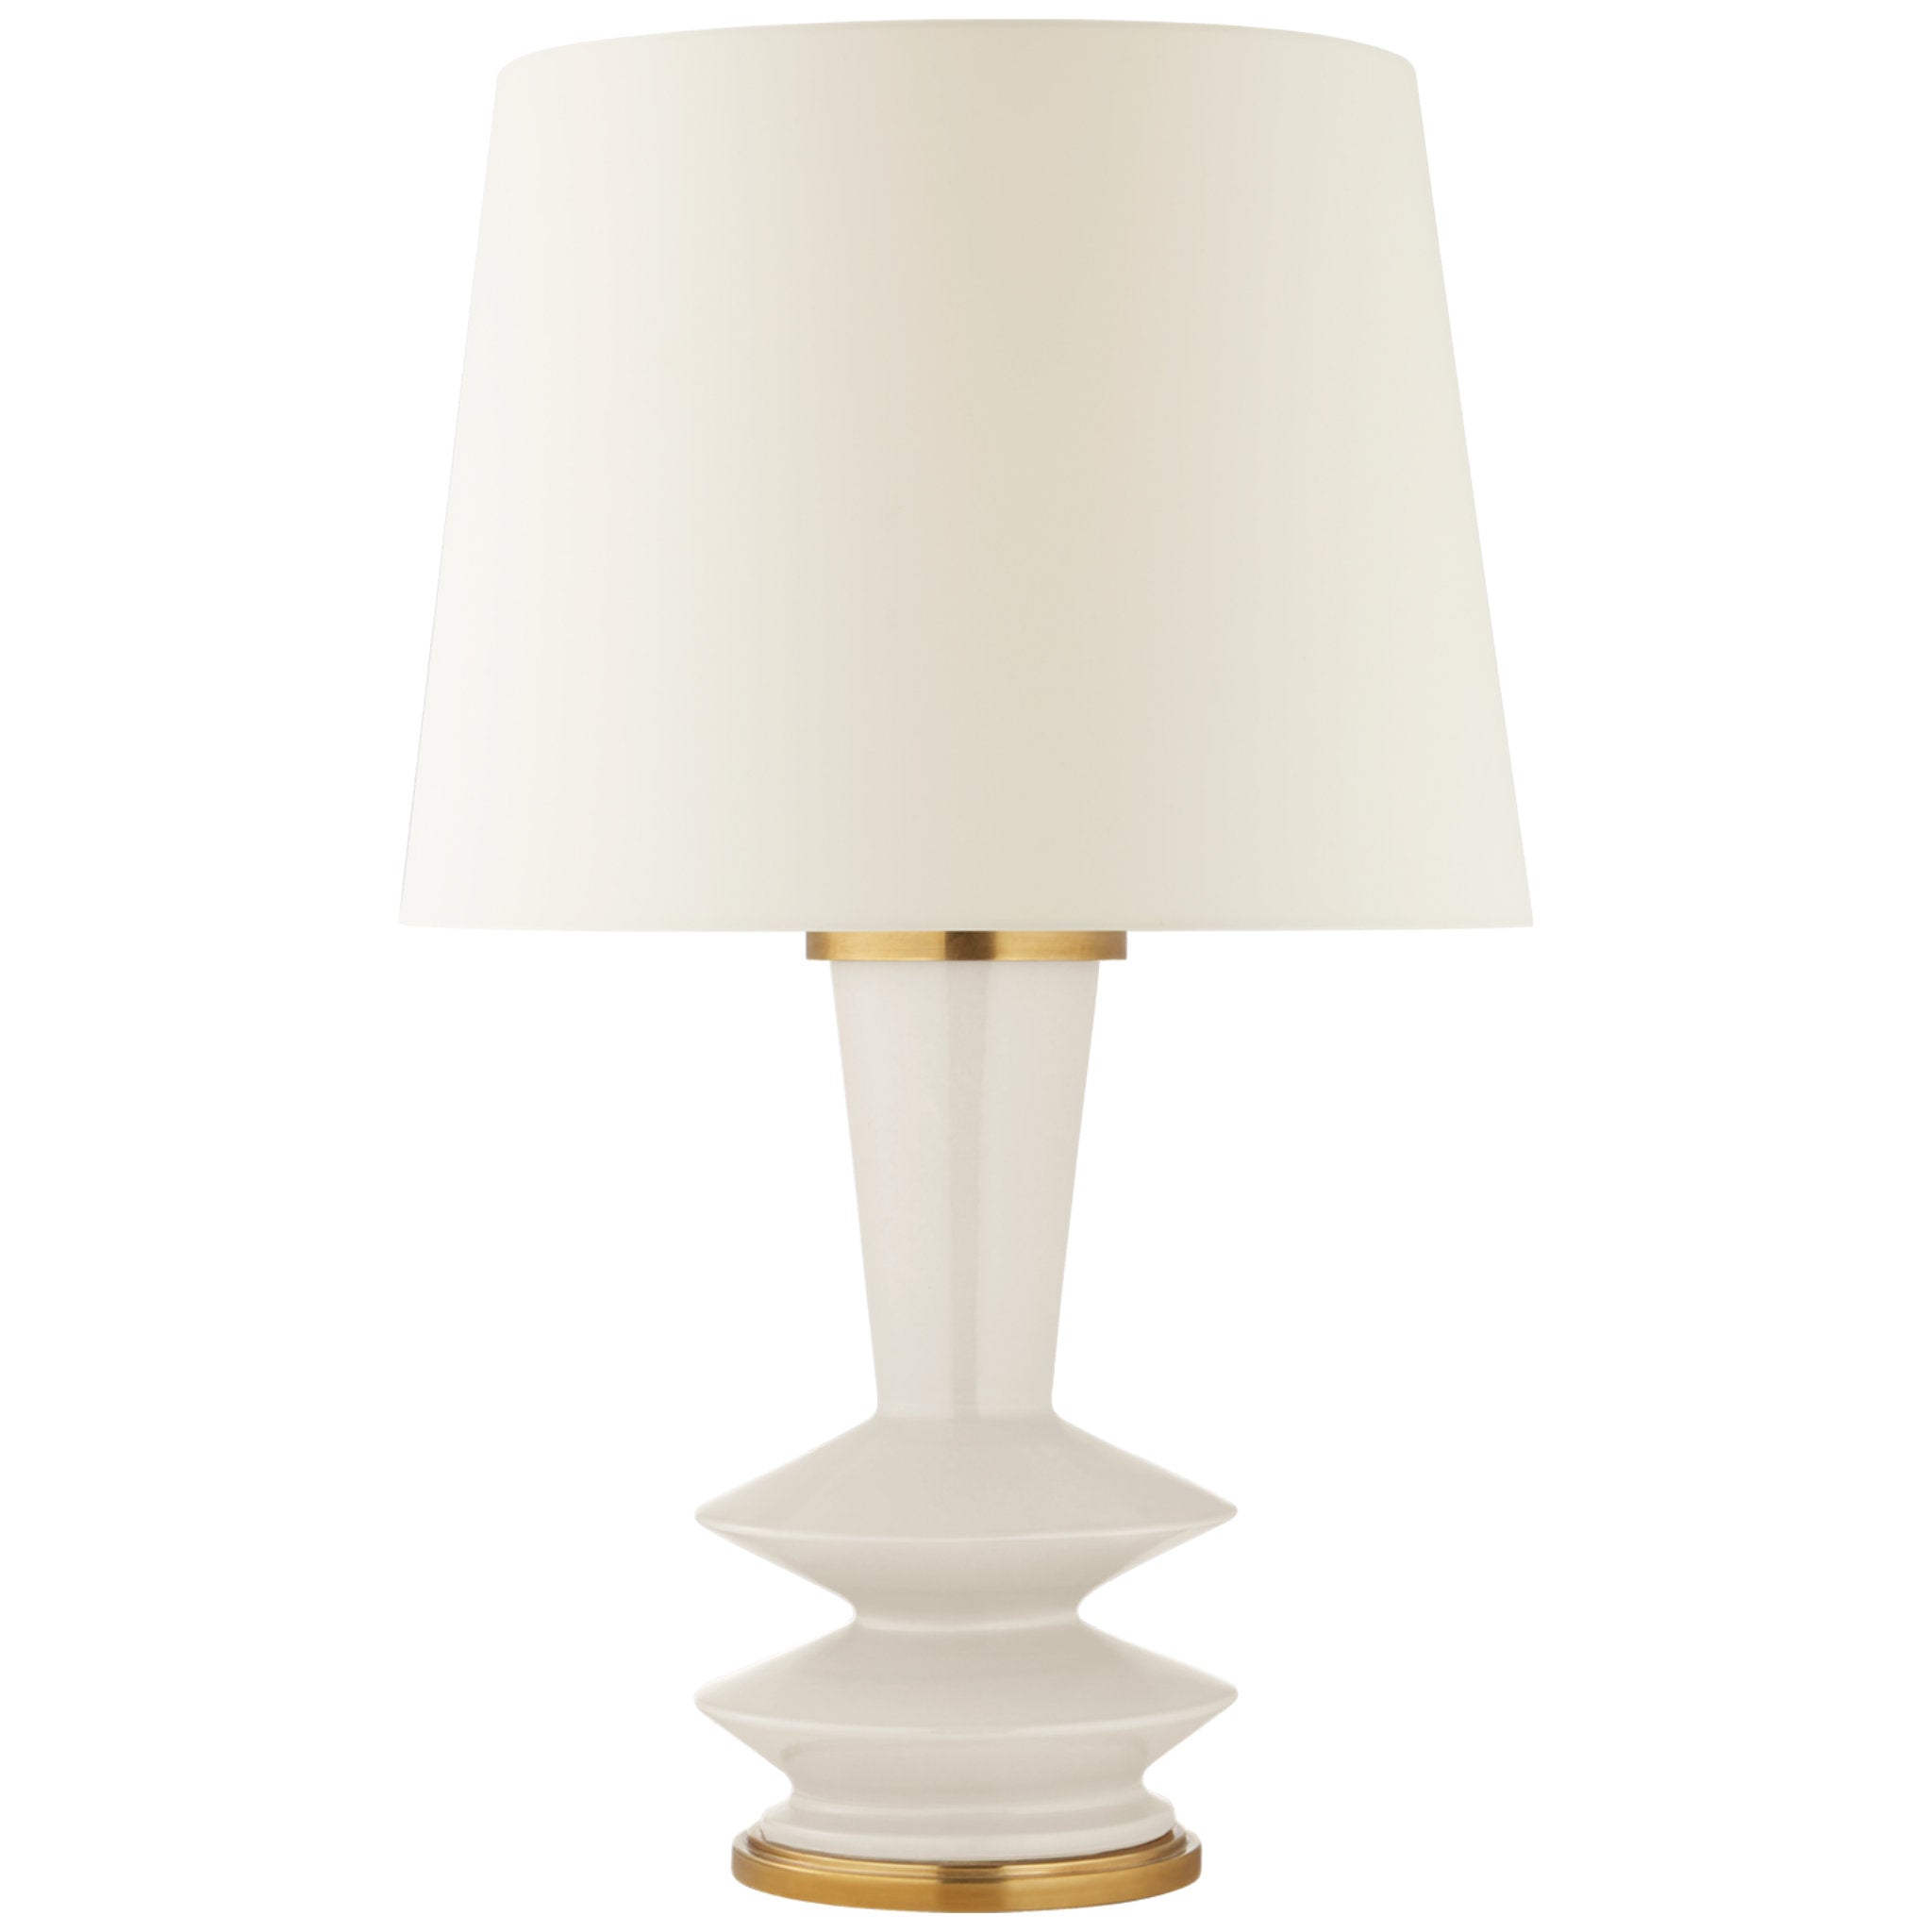 Christopher Spitzmiller Whittaker Medium Table Lamp in Ivory with Linen Shade